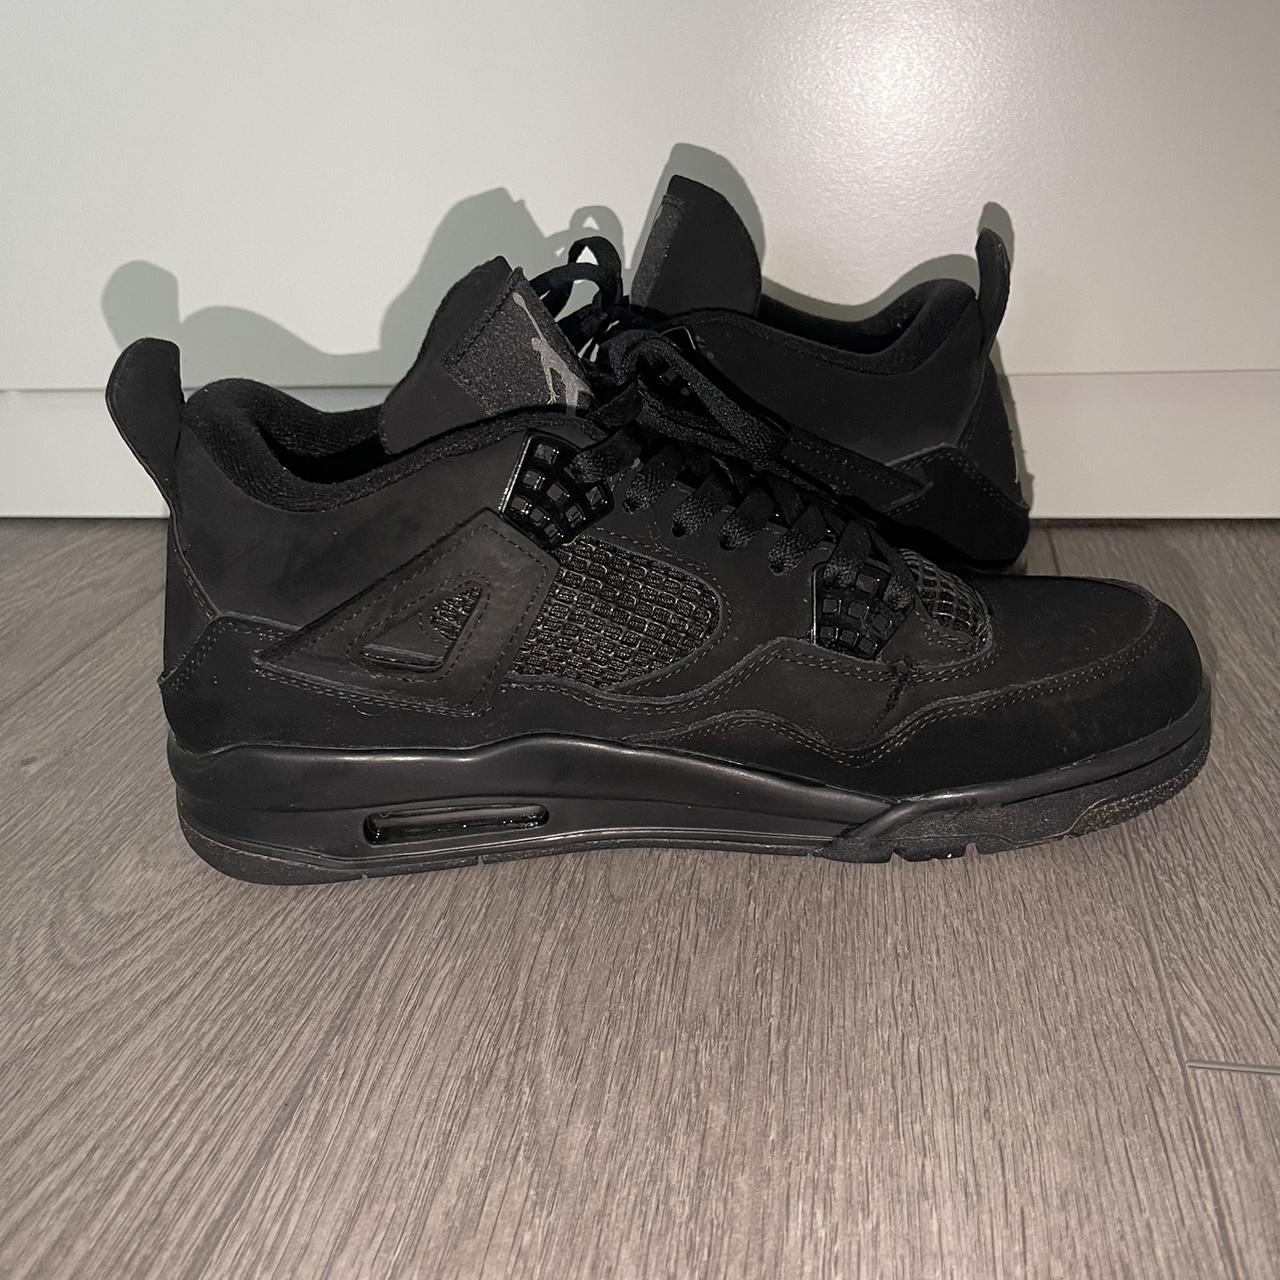 Jordan 4 Black cats Condition 7/10 These are not... - Depop